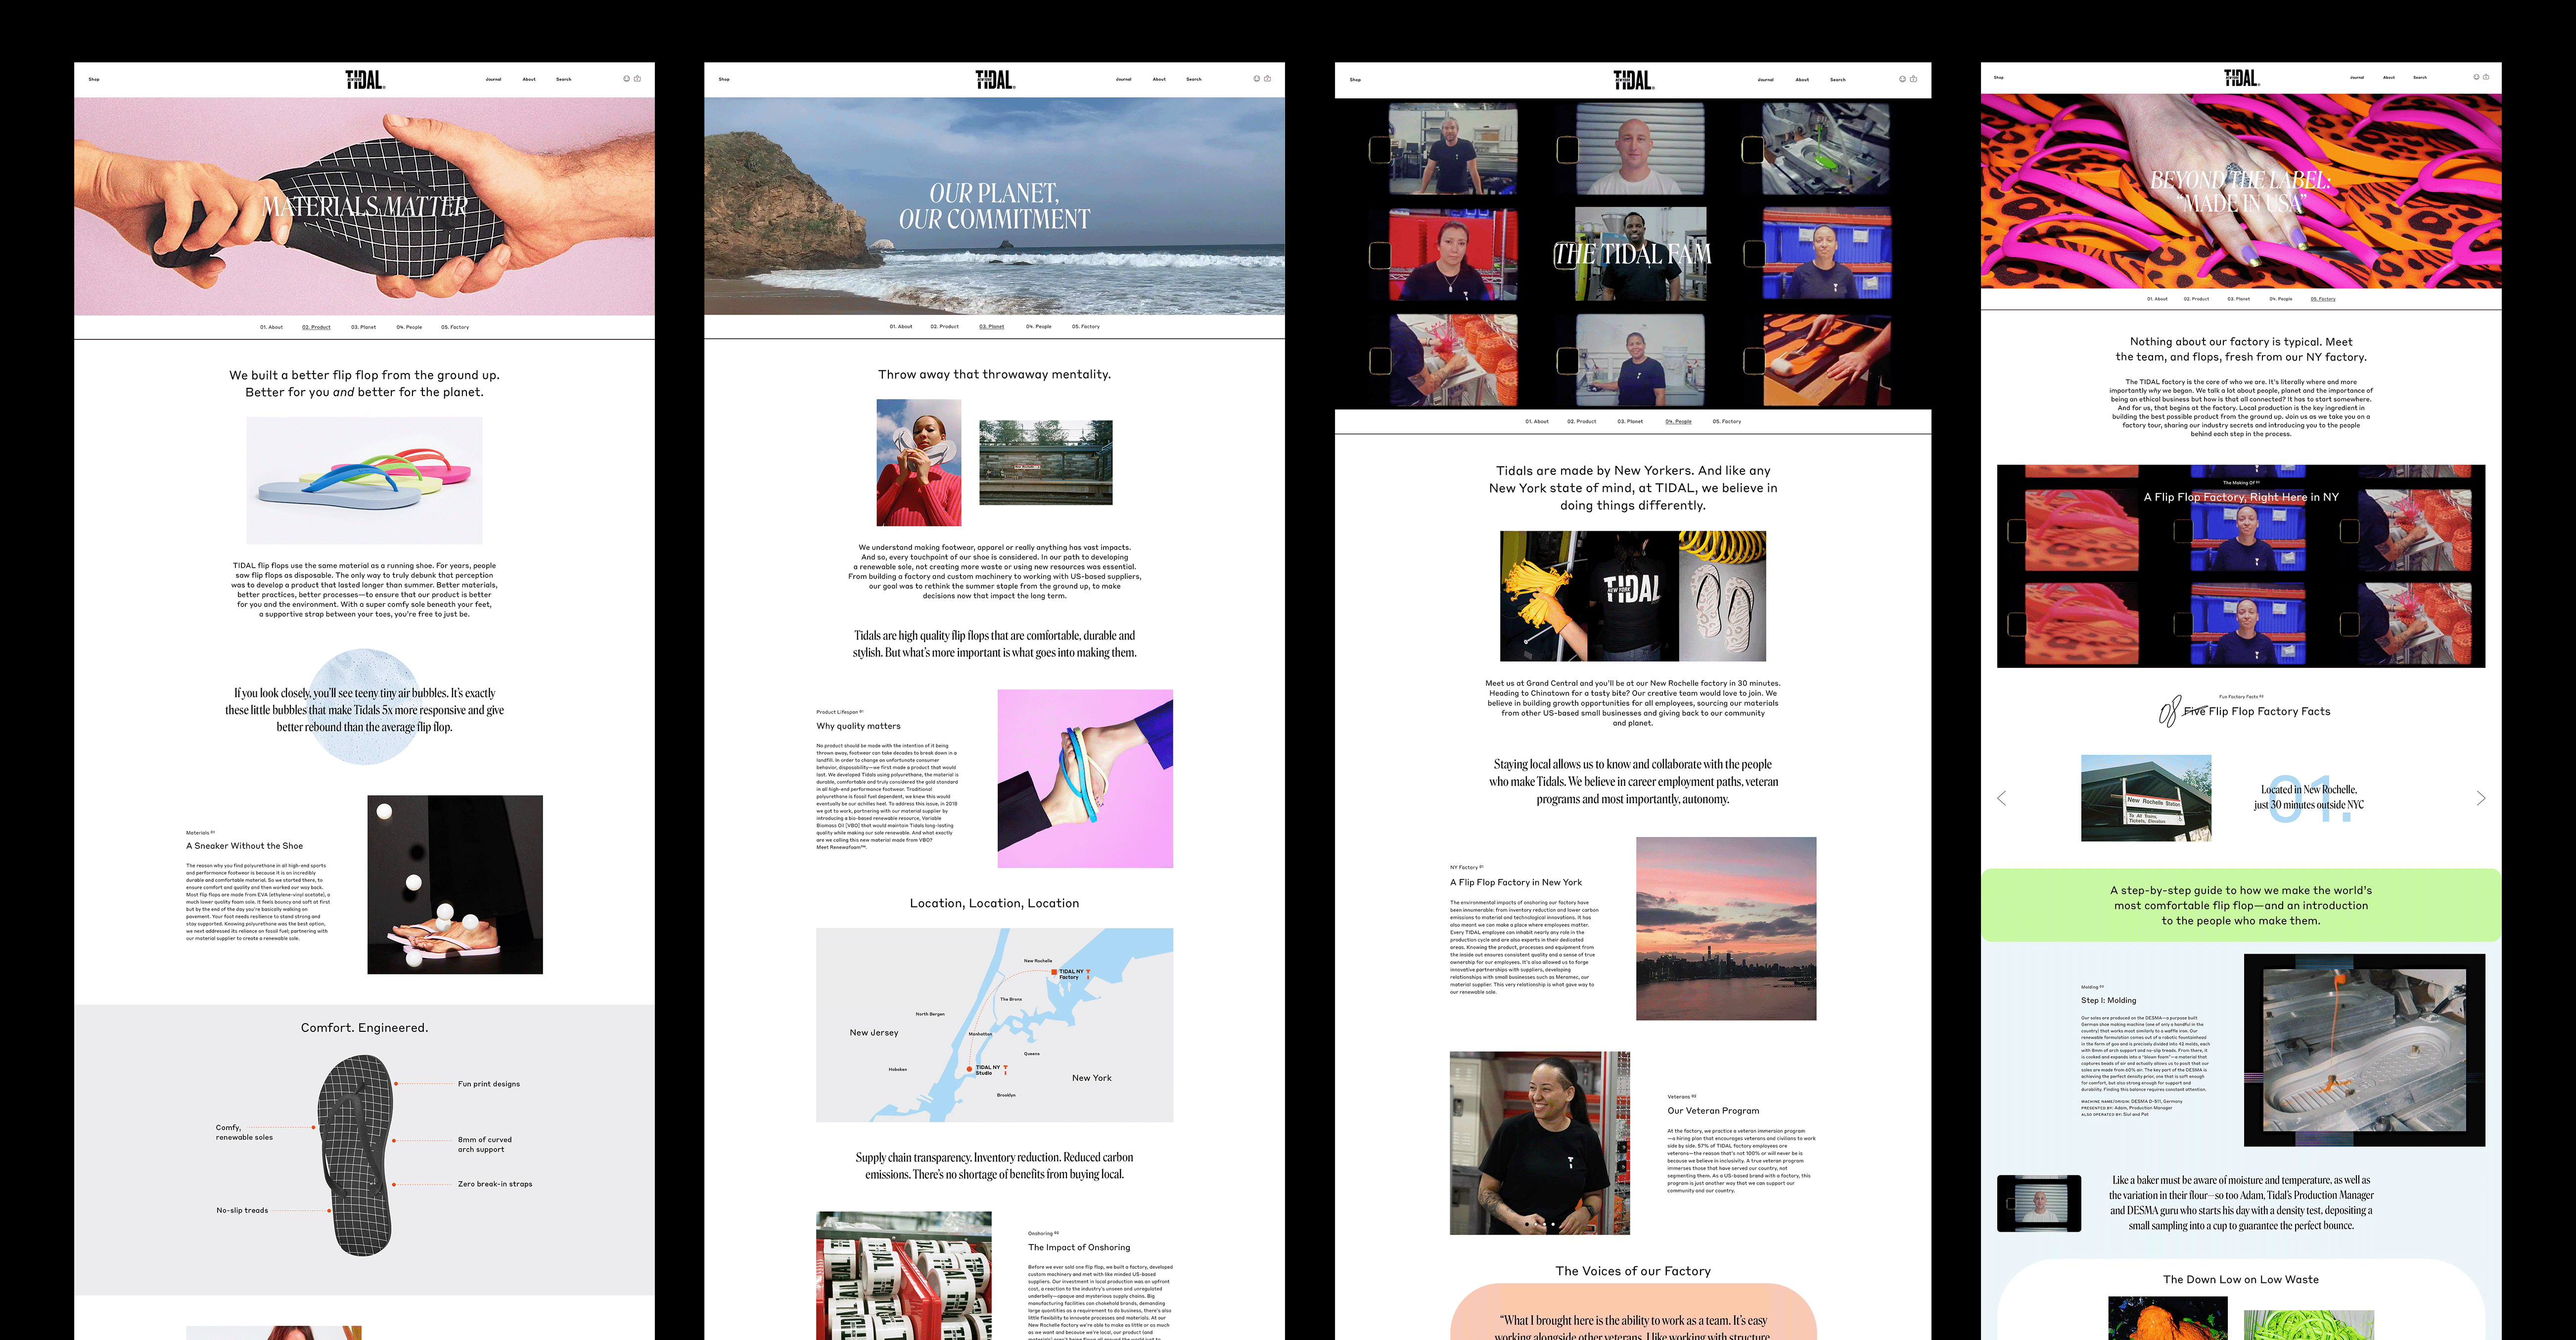 TIDAL-About-Us-Pages-1